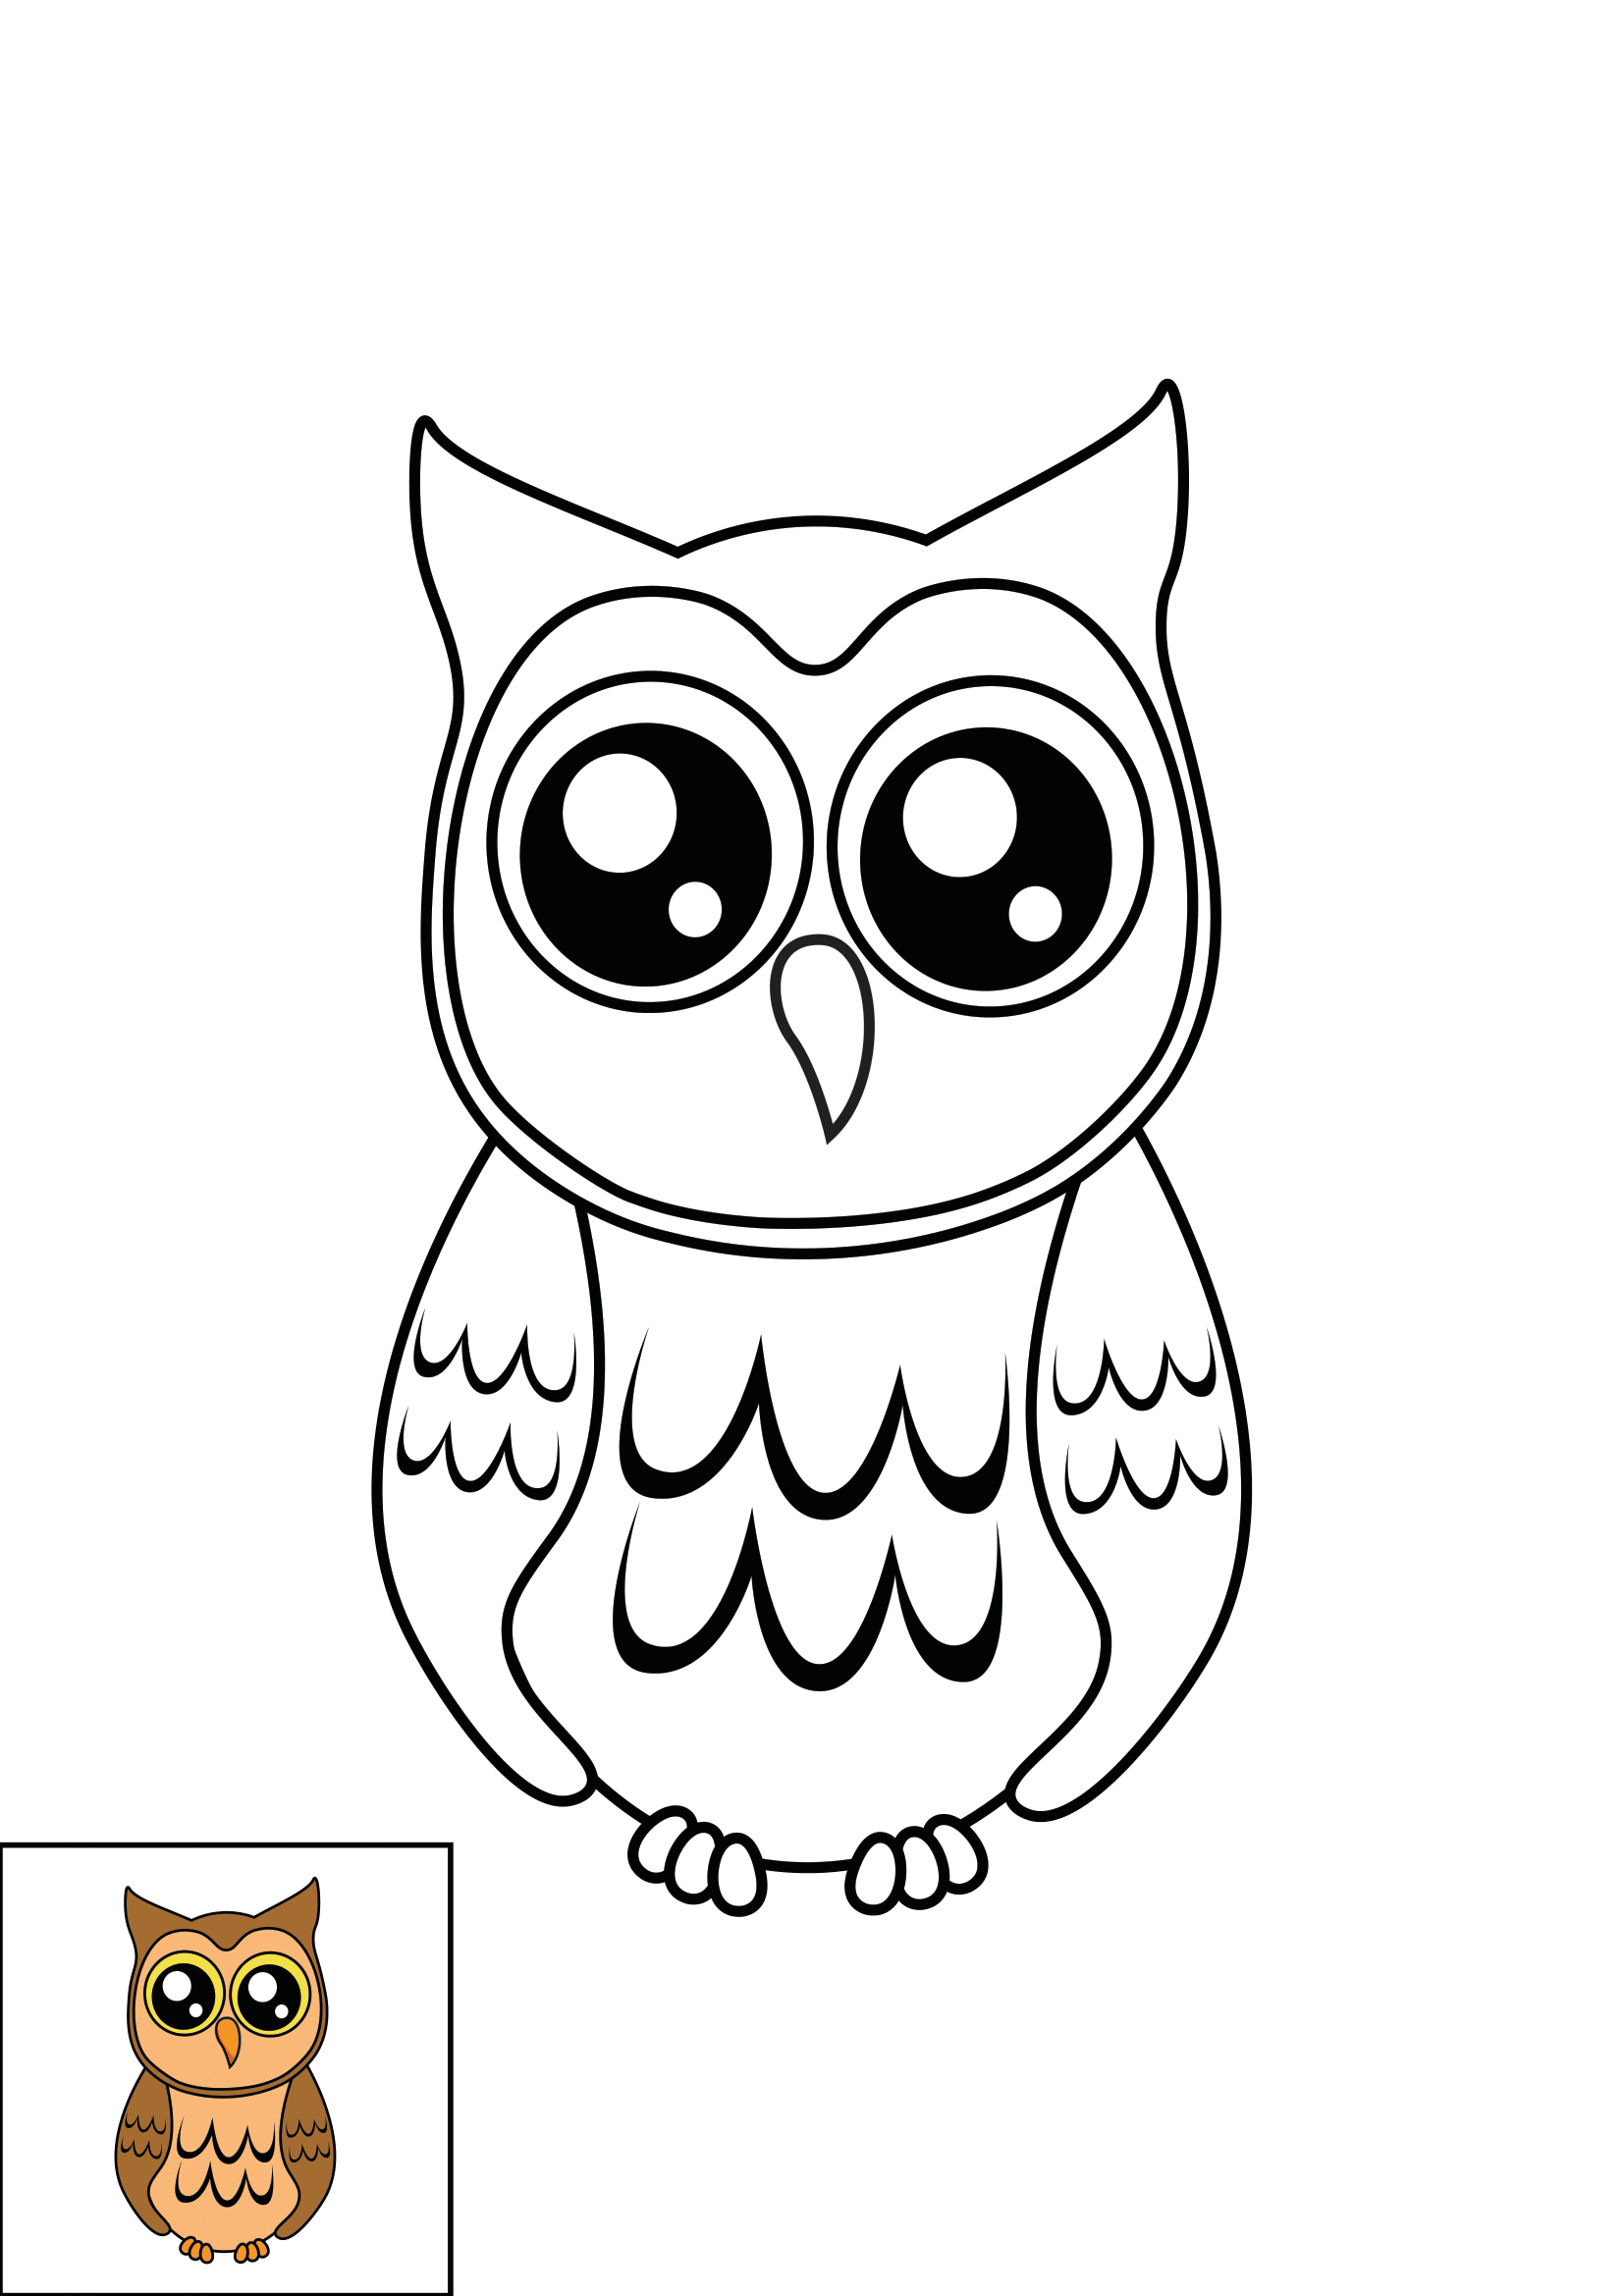 How to Draw A Cute Owl Step by Step Printable Color